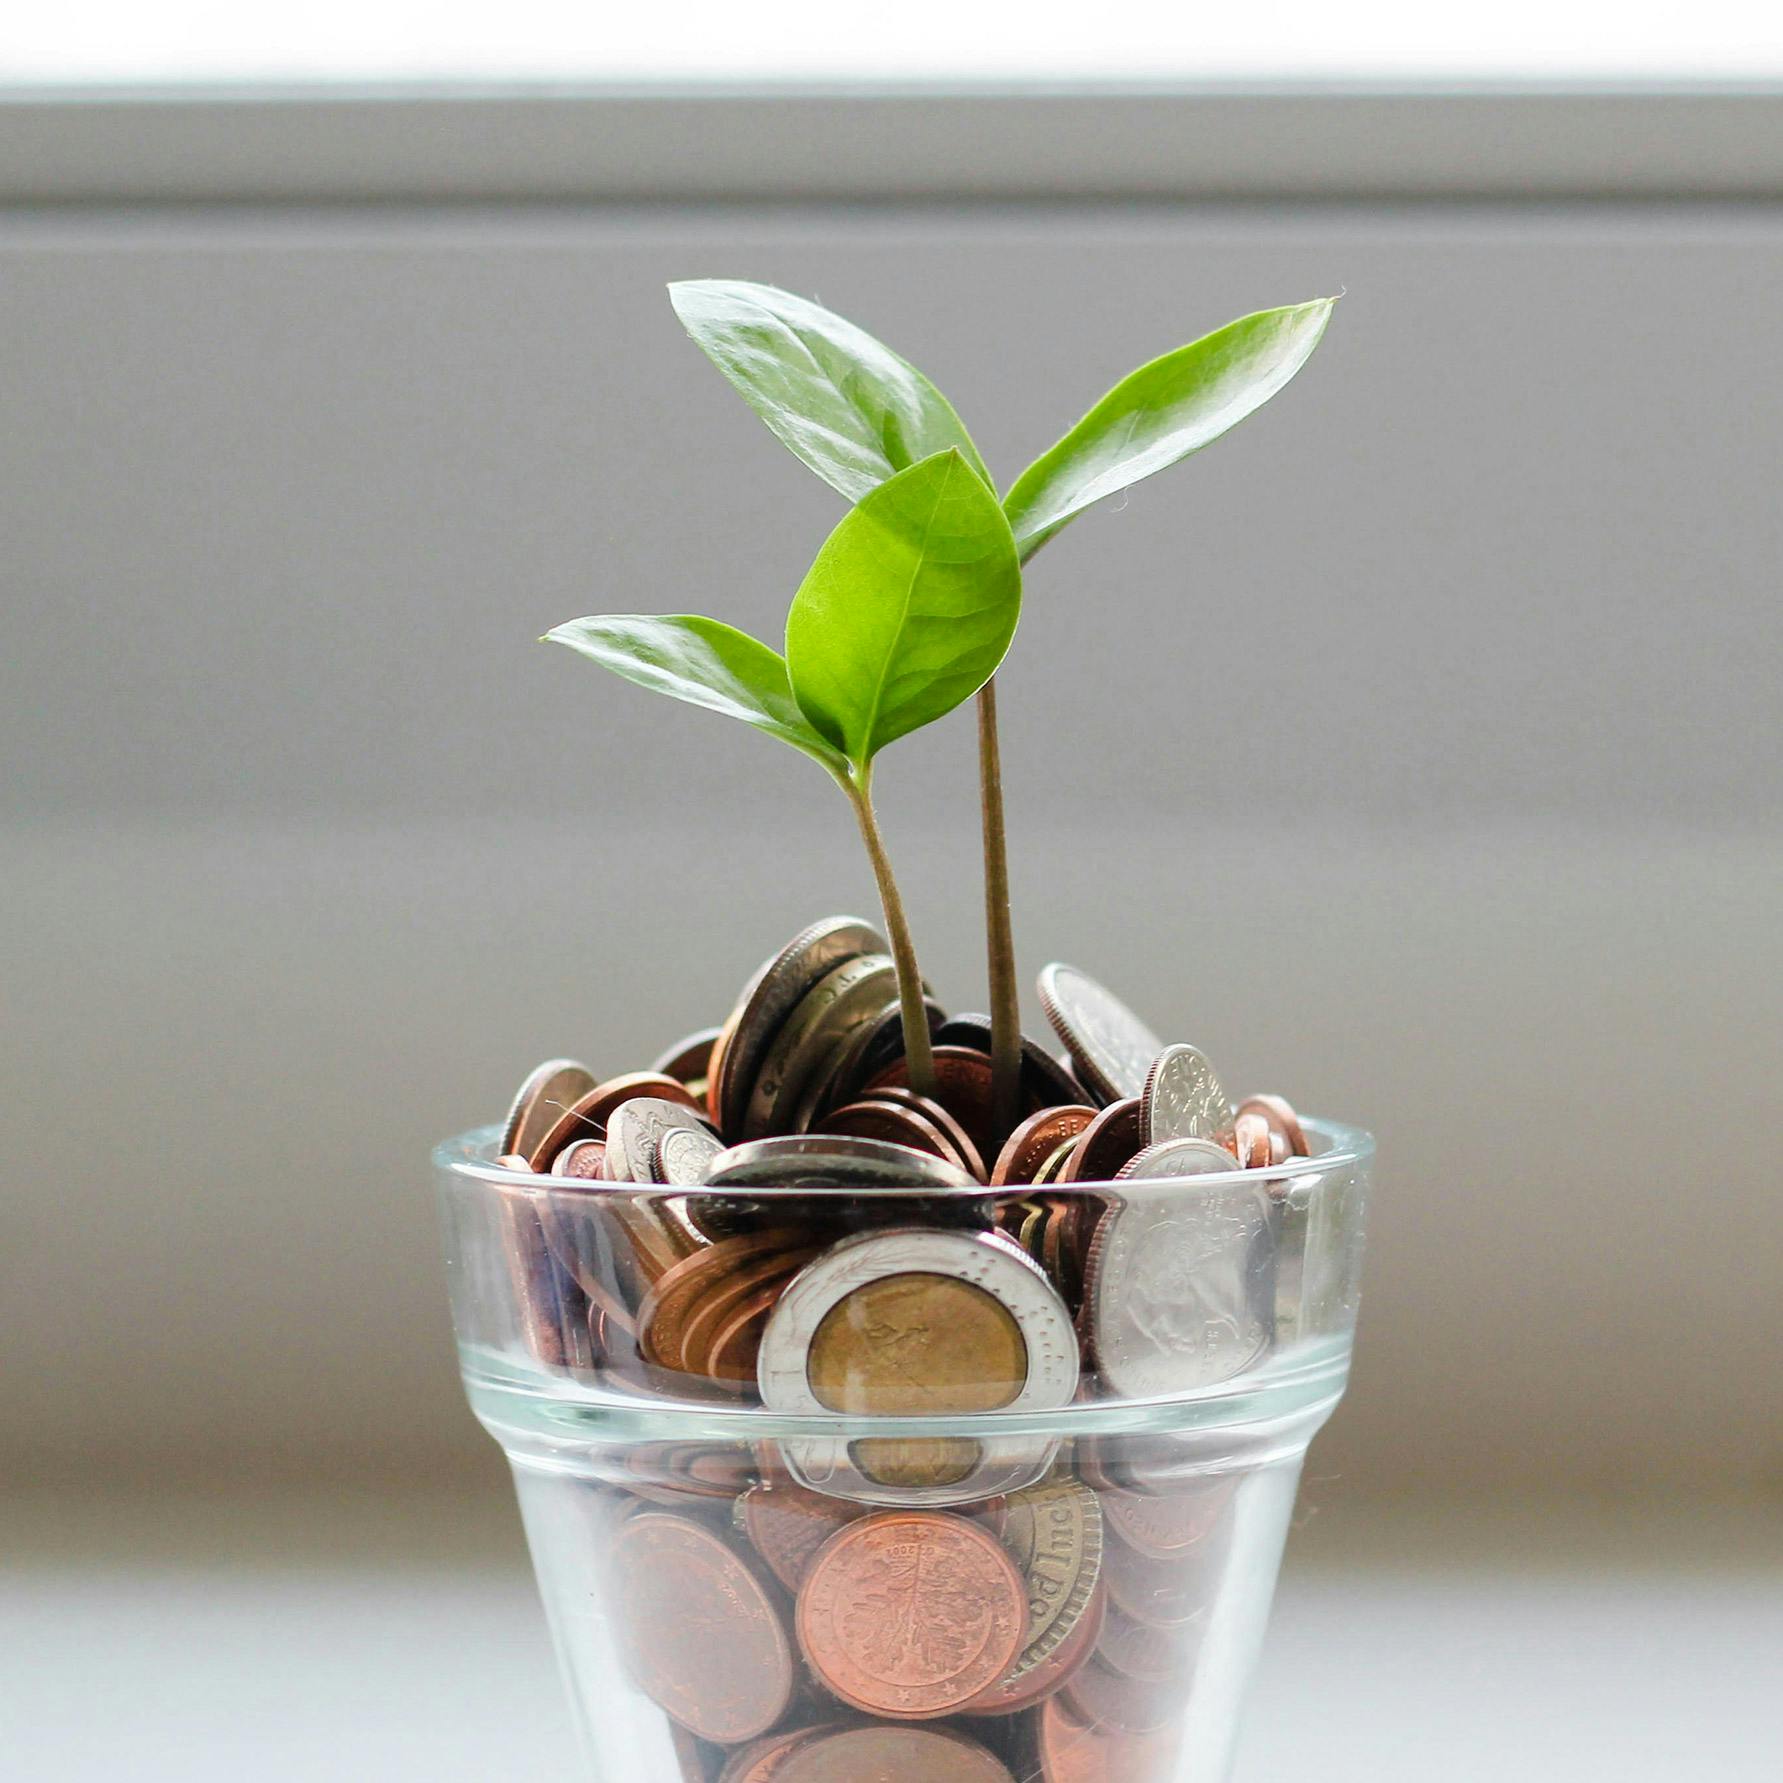 Small tree growing from a pot of money